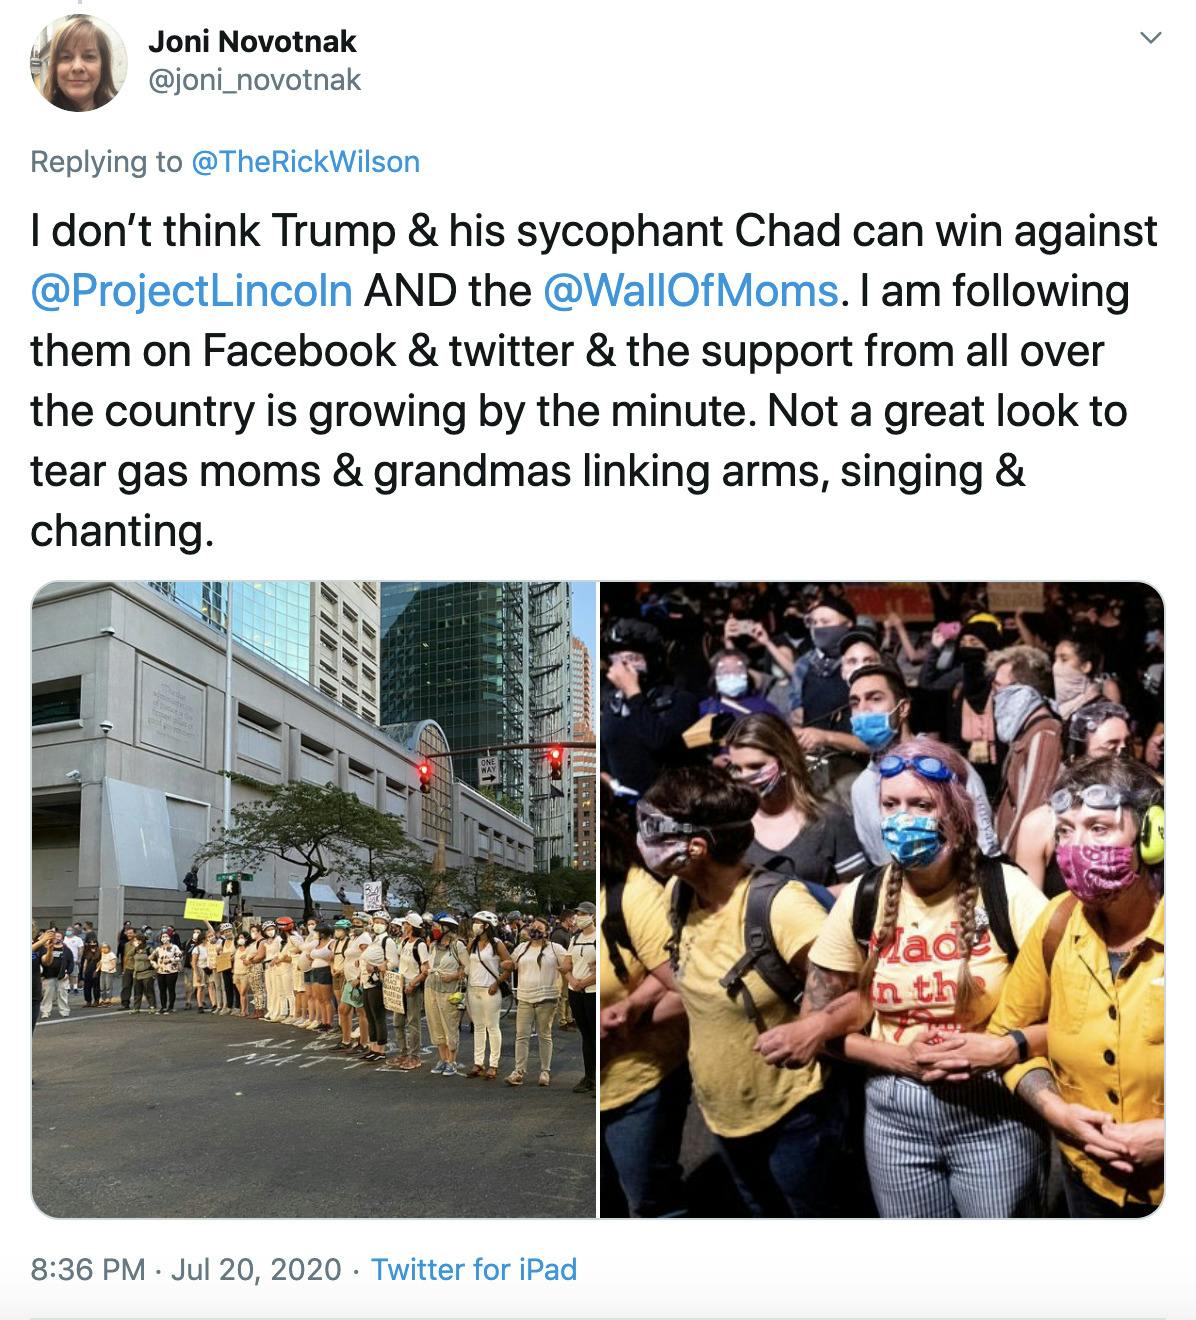 "I don’t think Trump & his sycophant Chad can win against  @ProjectLincoln  AND the  @WallOfMoms . I am following them on Facebook & twitter & the support from all over the country is growing by the minute. Not a great look to tear gas moms & grandmas linking arms, singing & chanting." two photographs of the yellow clad protesters